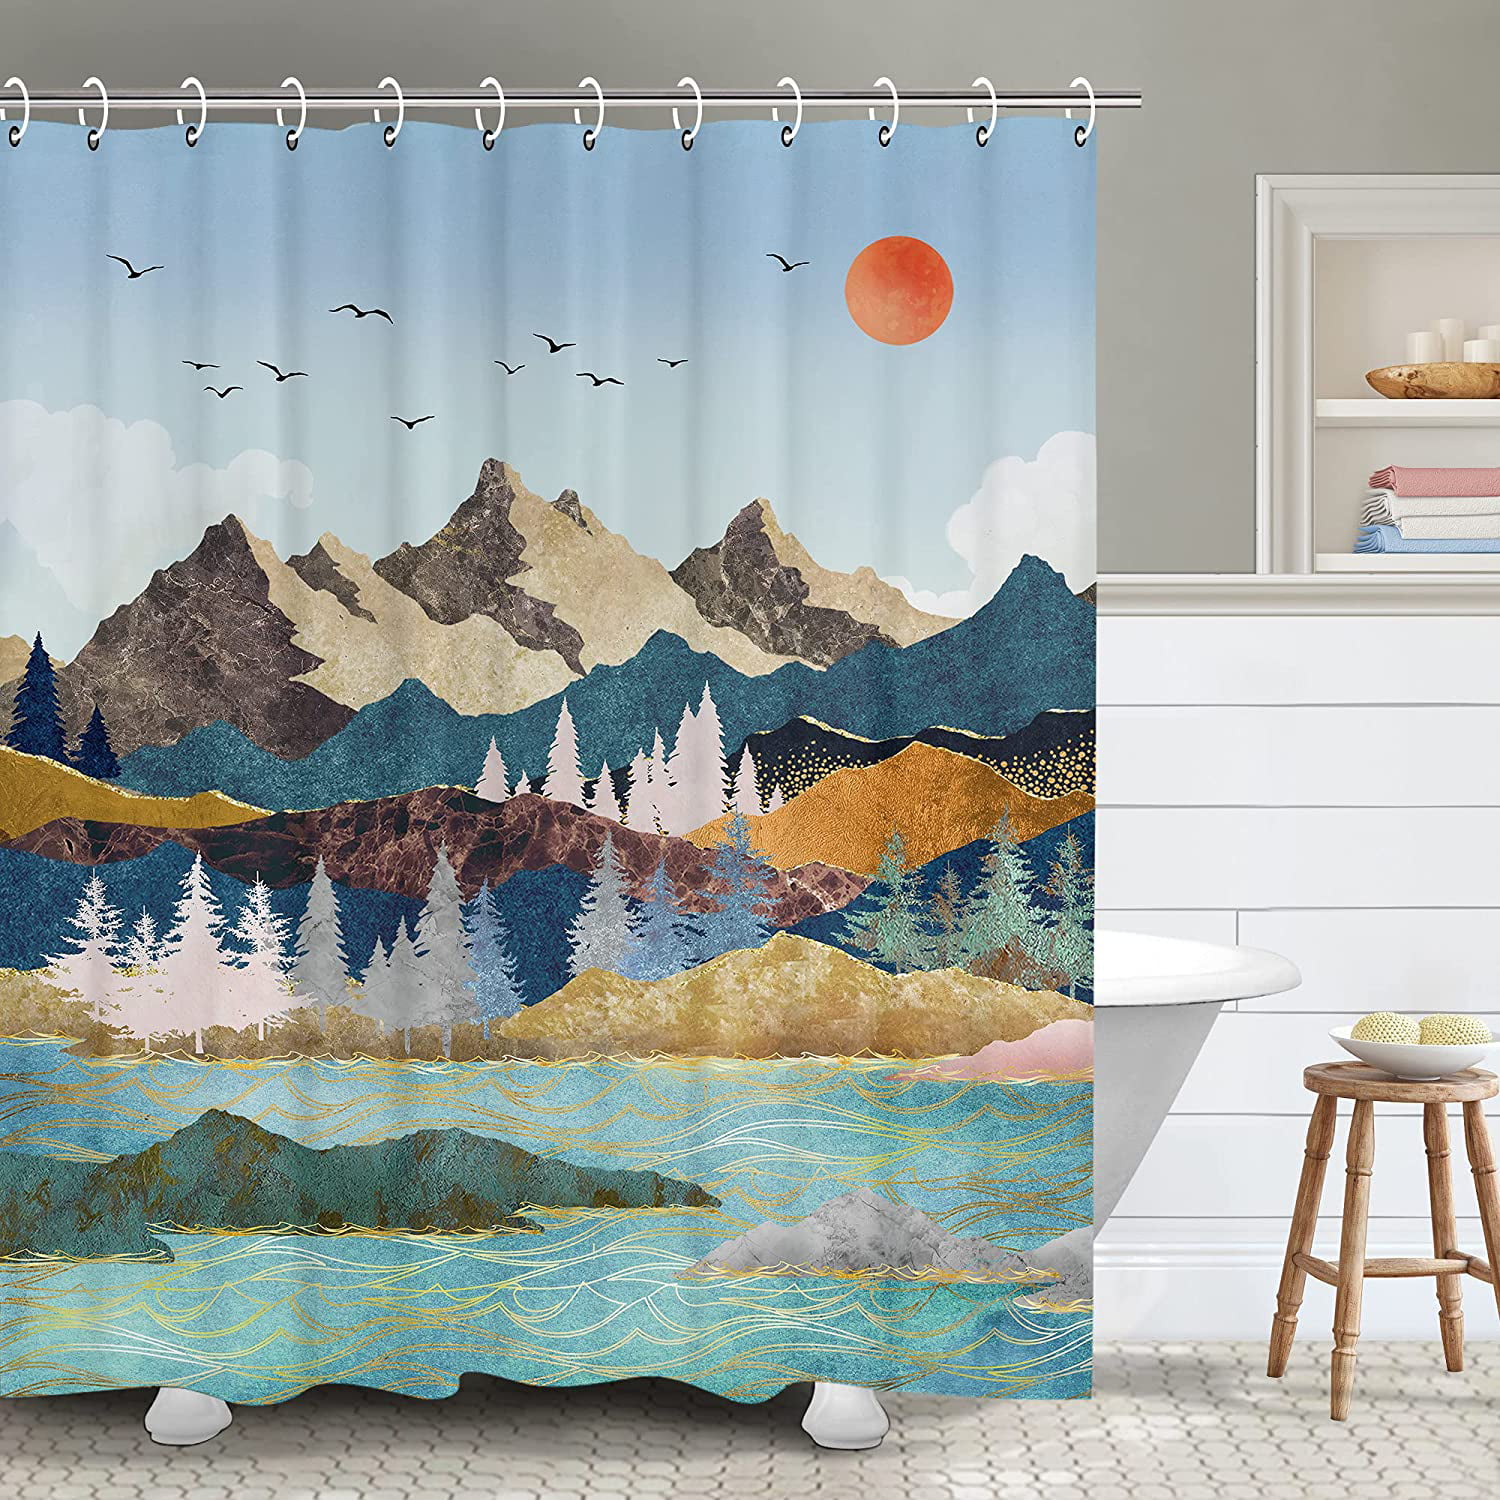 Details about   Sunset Colorful Mountain Landscapes Birds Waterproof Fabric Shower Curtain Set 